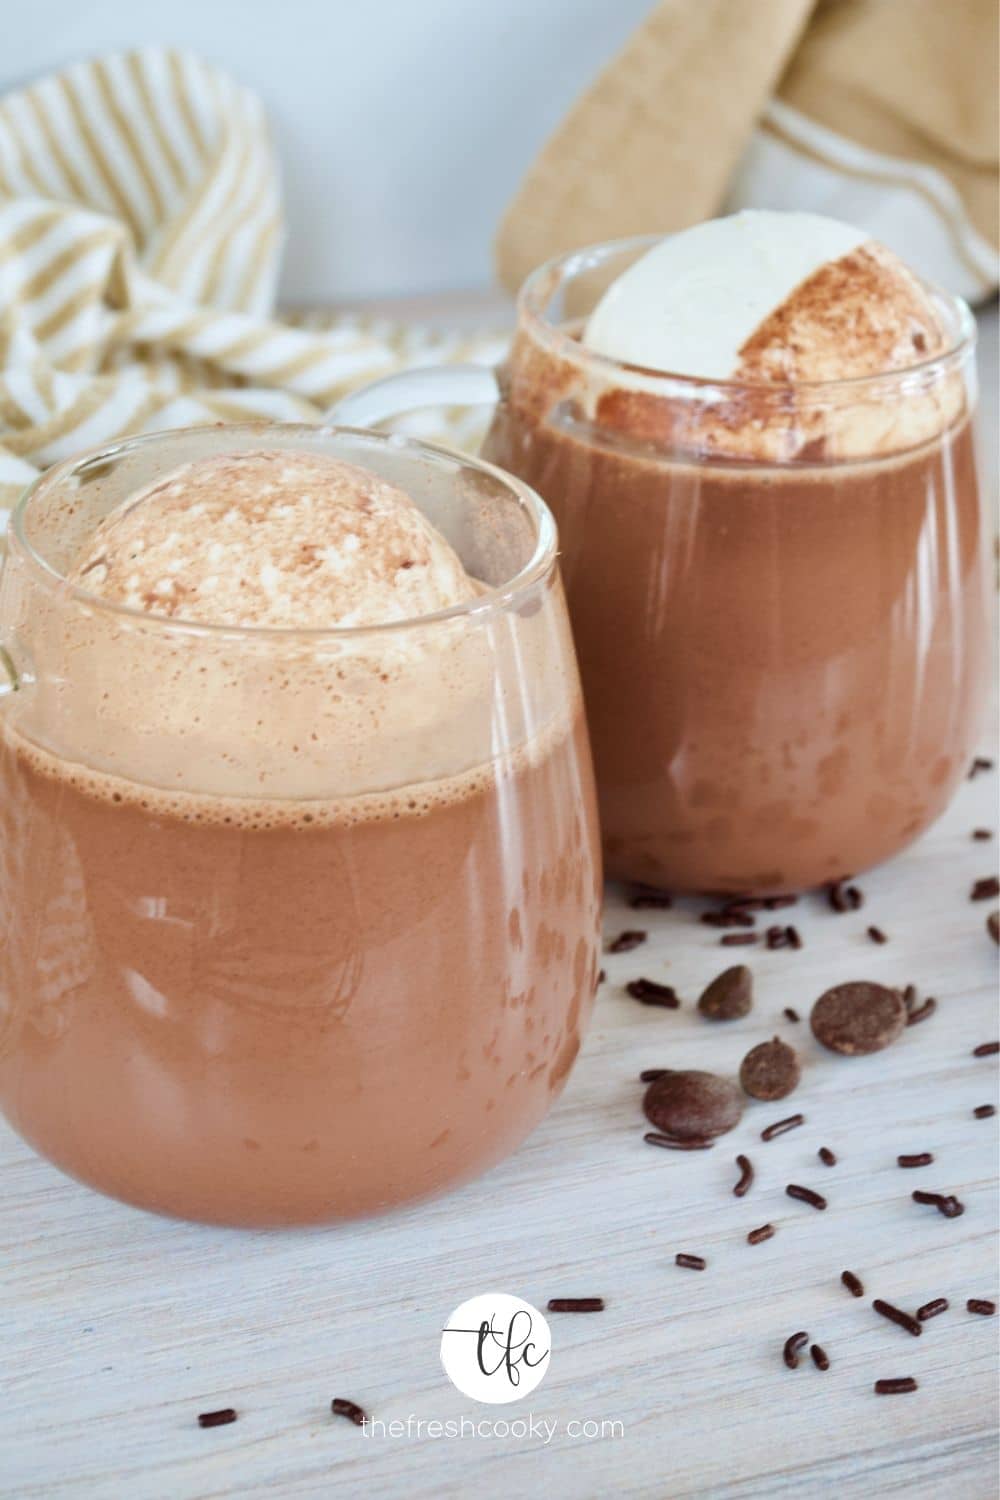 Hero image for Homemade Hot Chocolate in glass mugs with large spheres of whipped cream.